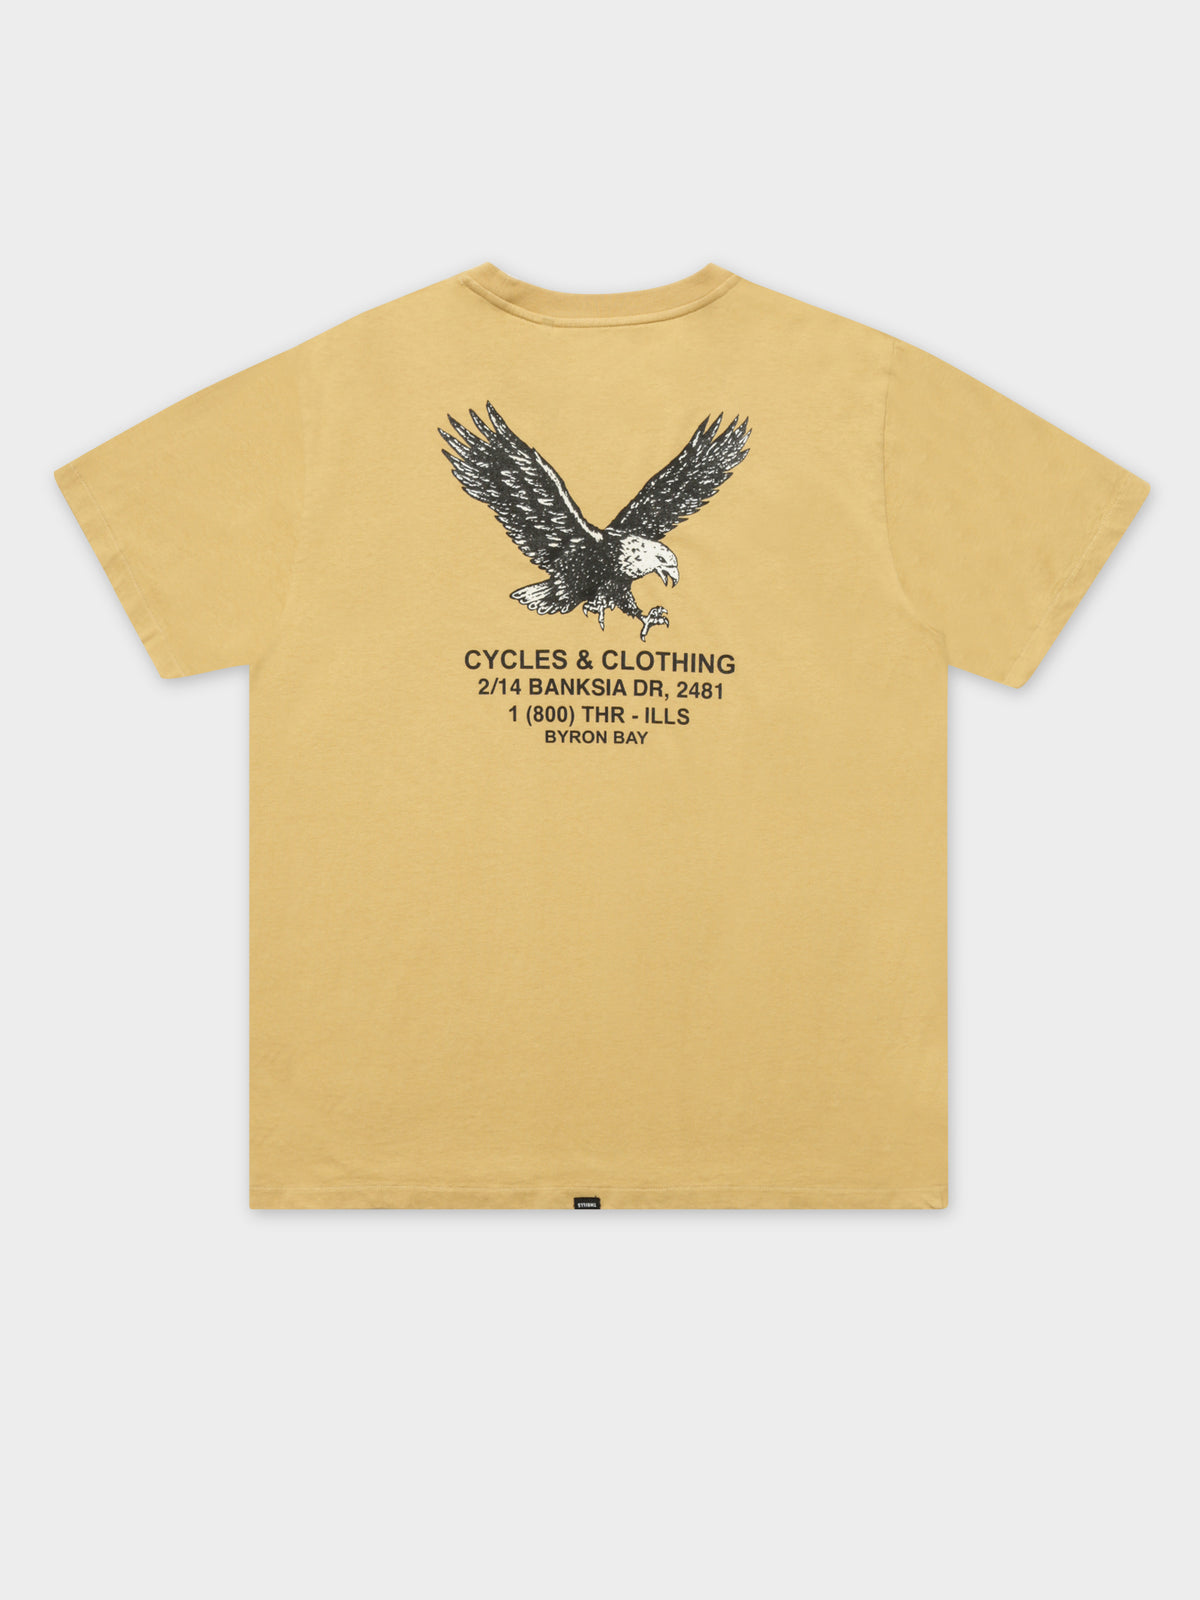 Primitive Merch Fit T-Shirt in Yellow